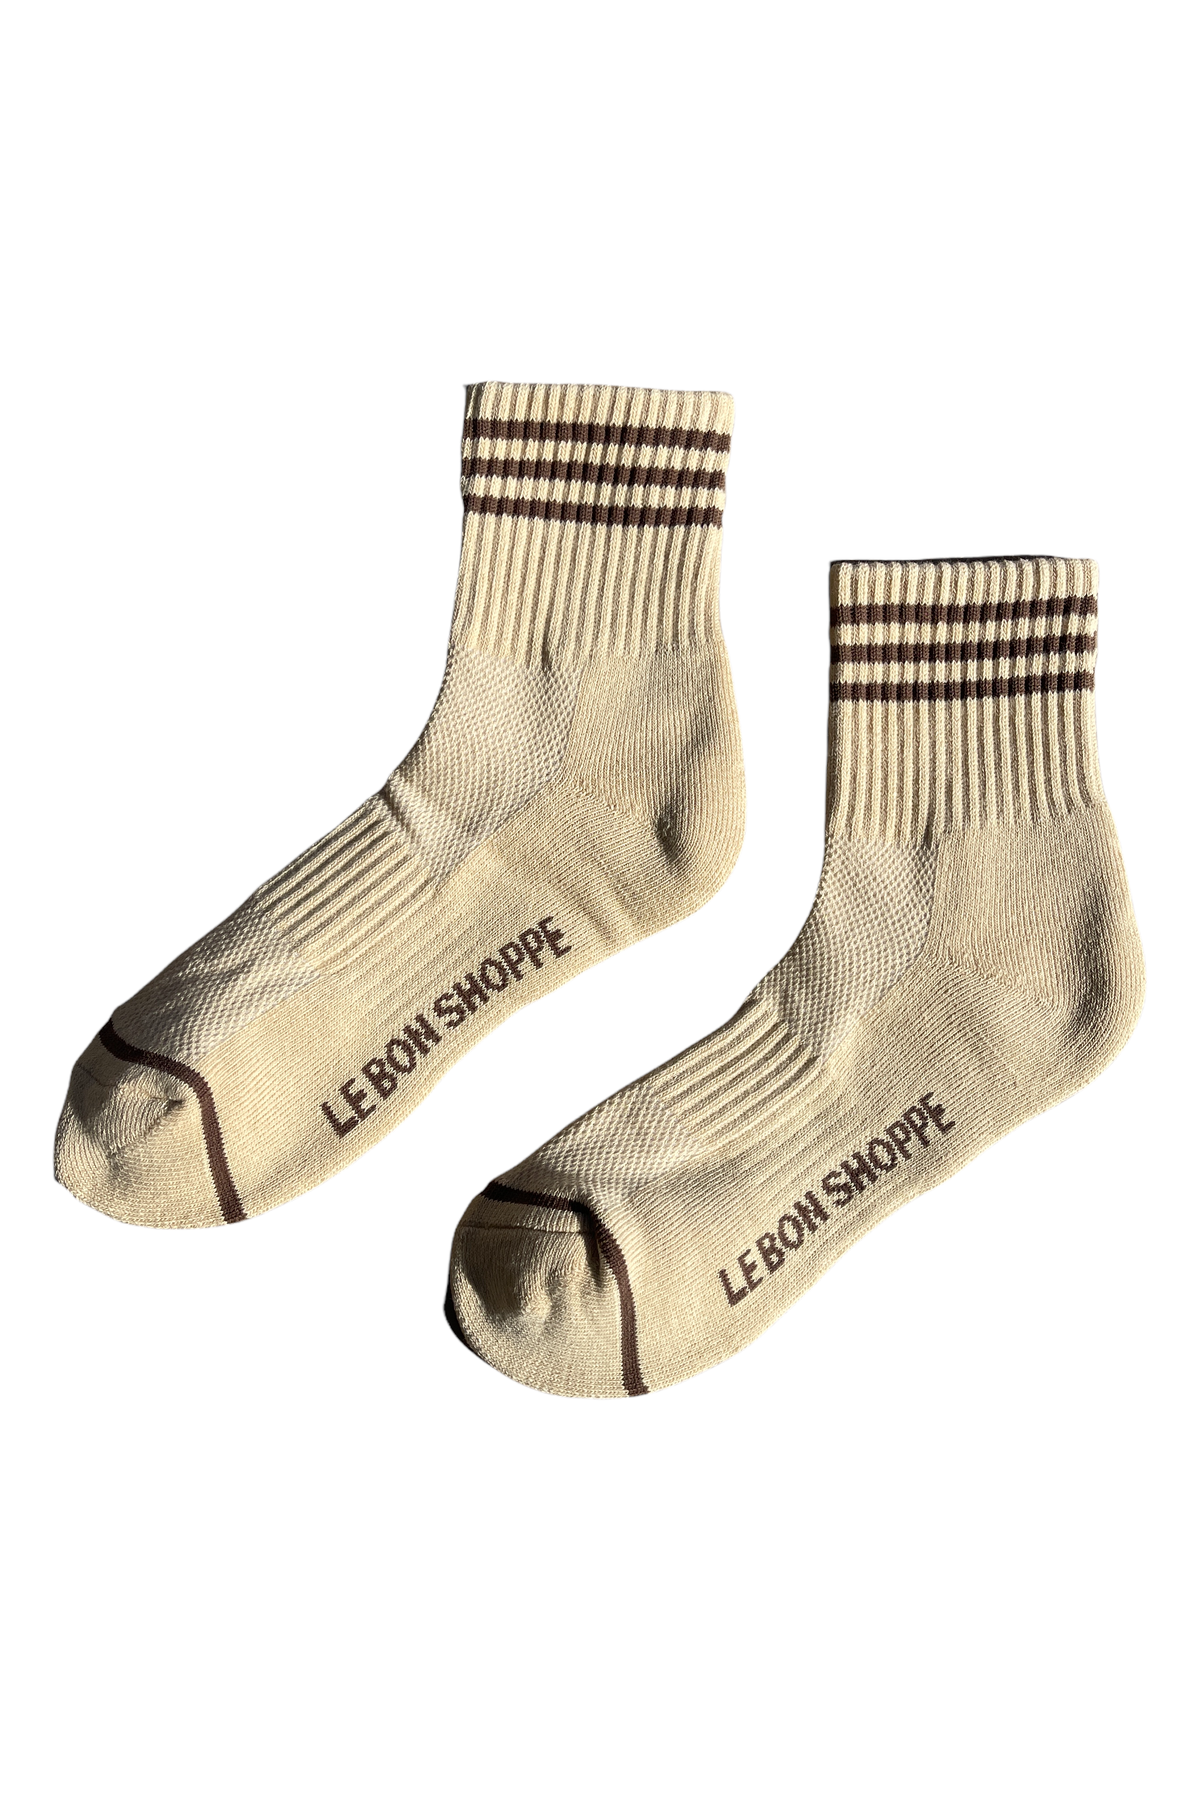 Le Bon Shoppe's best socks - the girlfriend mid-rise sock with striped in the colour daisy (sand with brown ankle stripes)